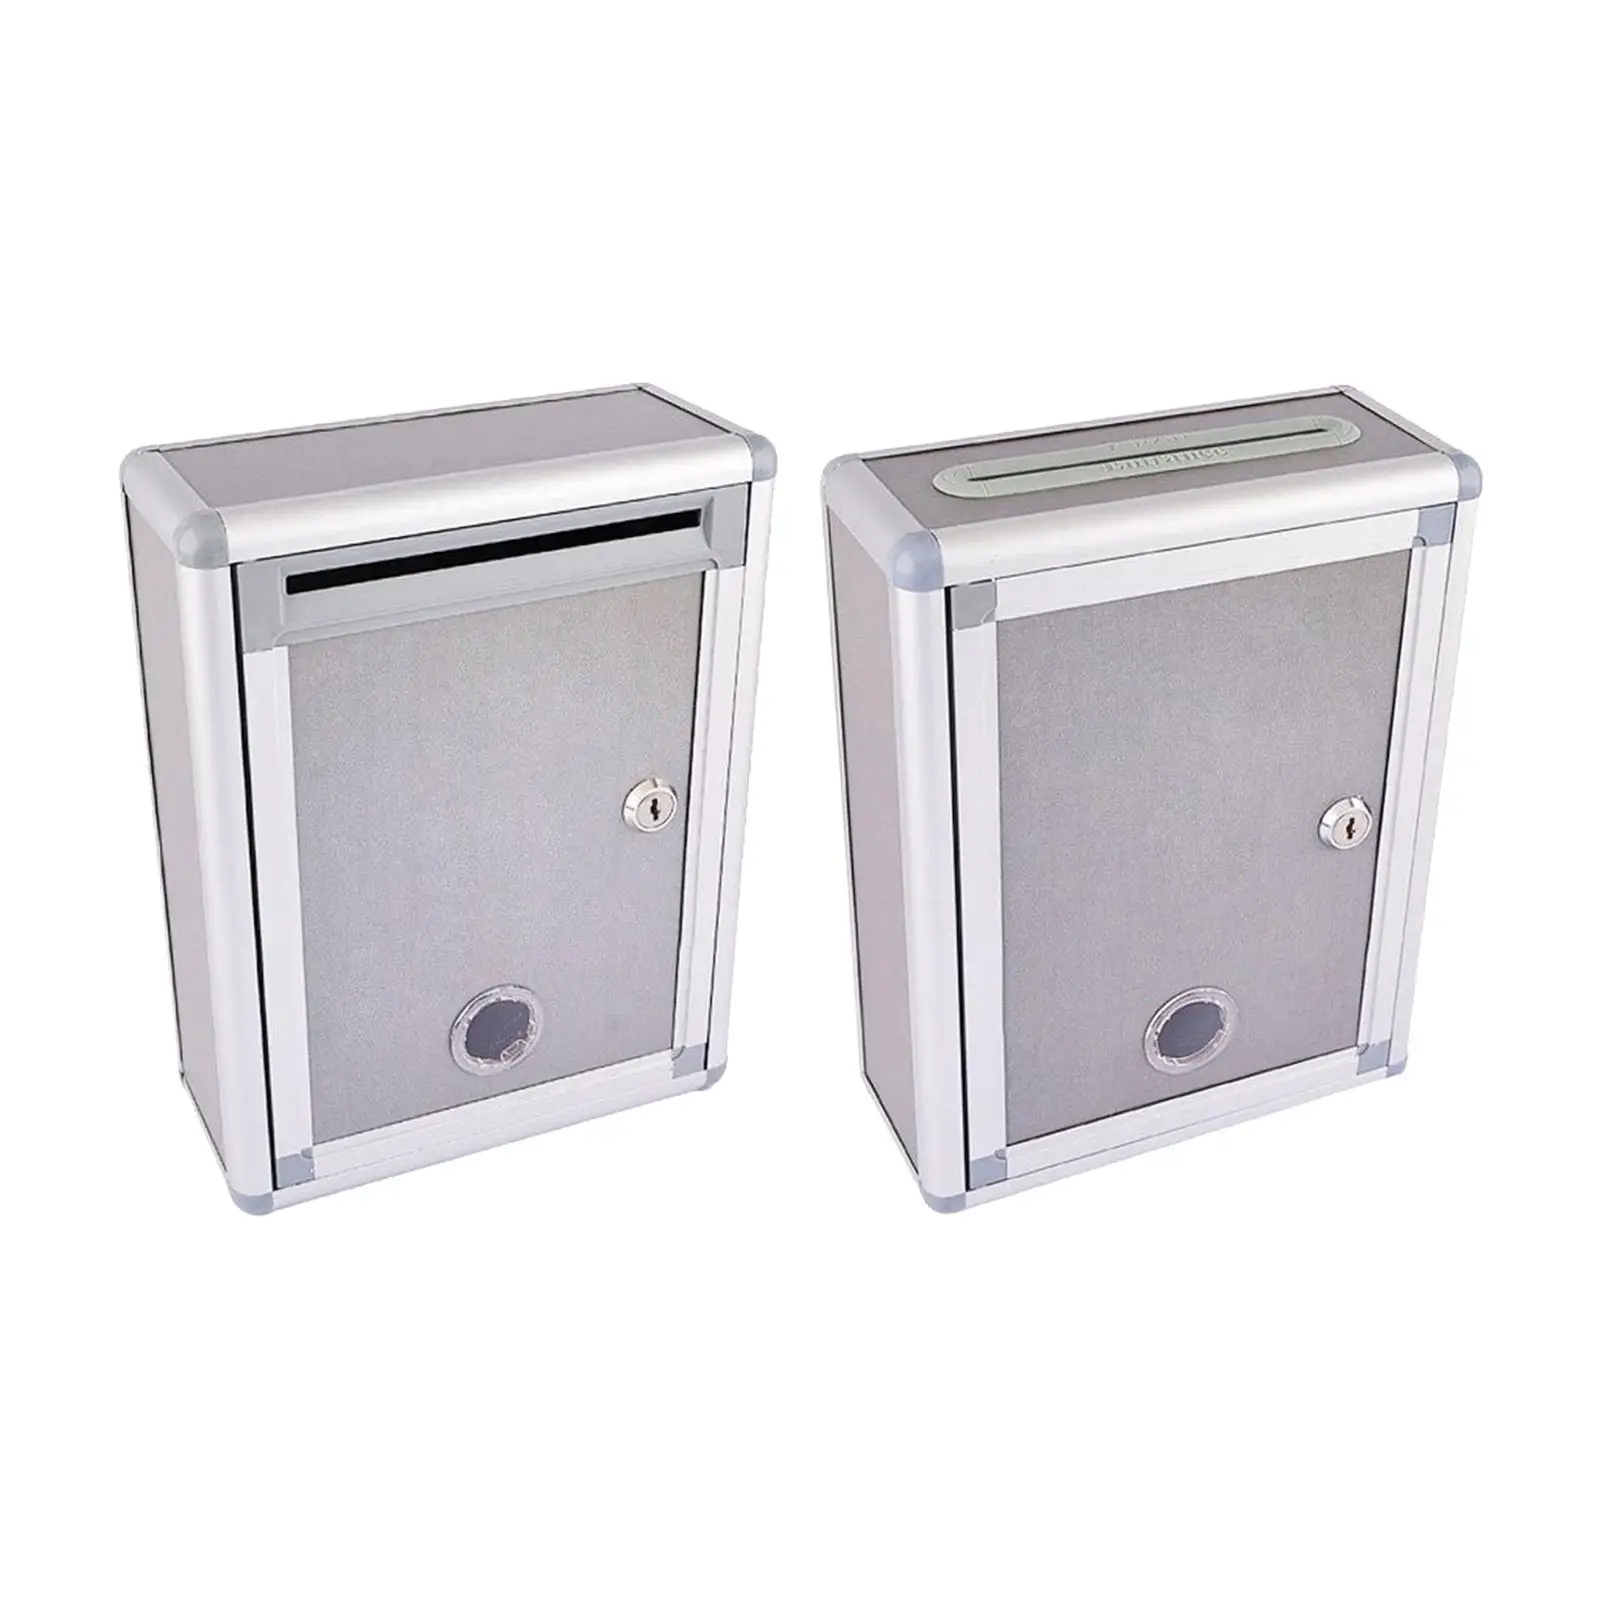 Wall Mount Suggestion Box with Key 8x3.7x11inch Complaint Box Letter Box for Holding Envelopes, Paperwork, Newspapers Sturdy